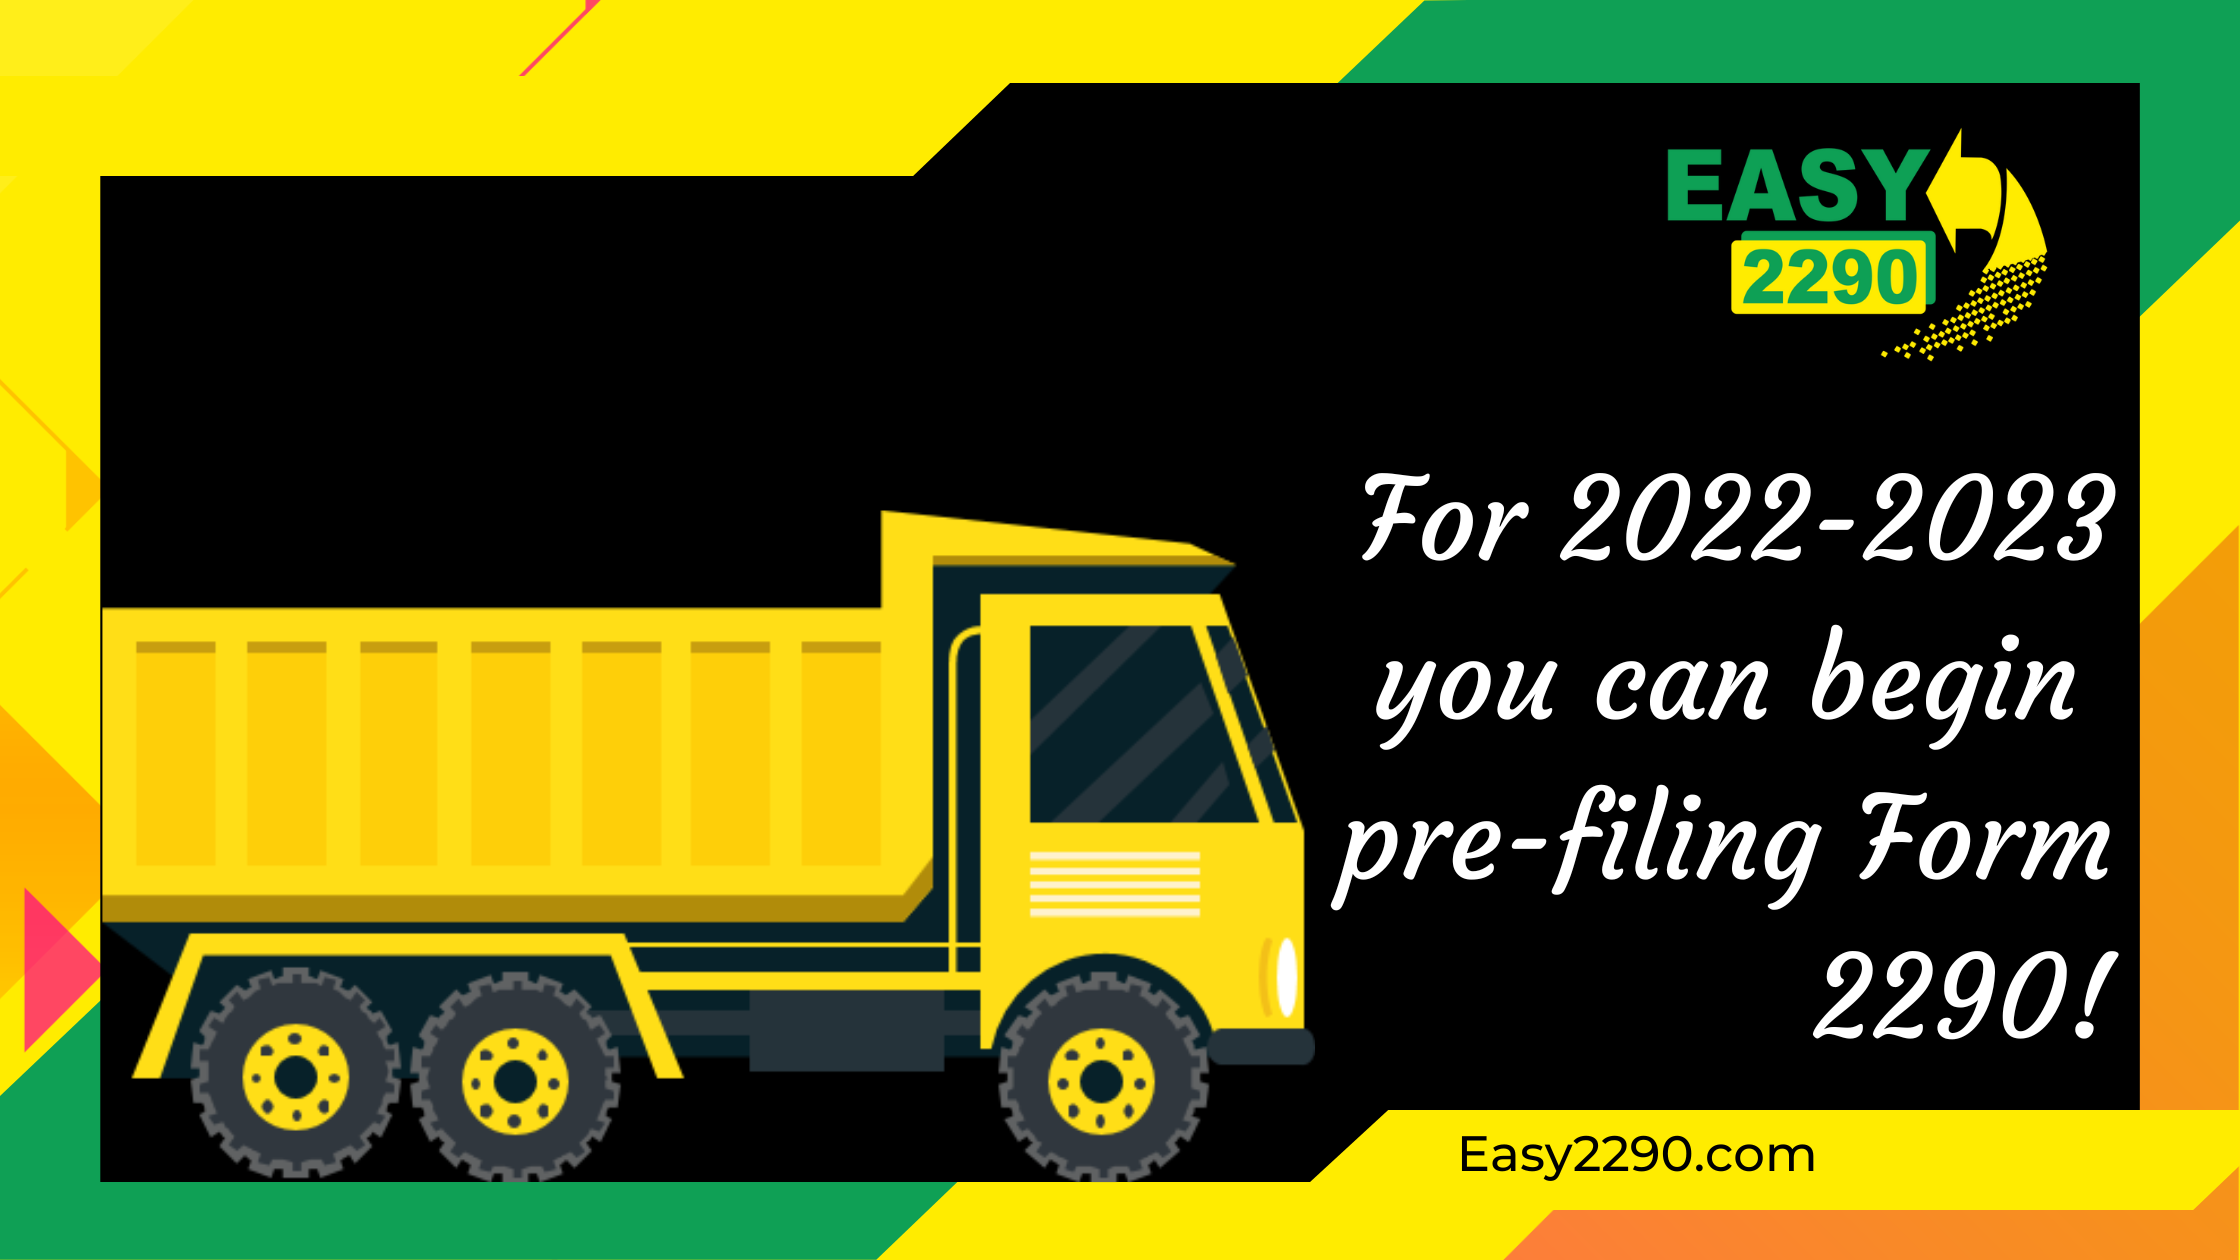 For 2022-2023, you can begin pre-filing Form 2290!